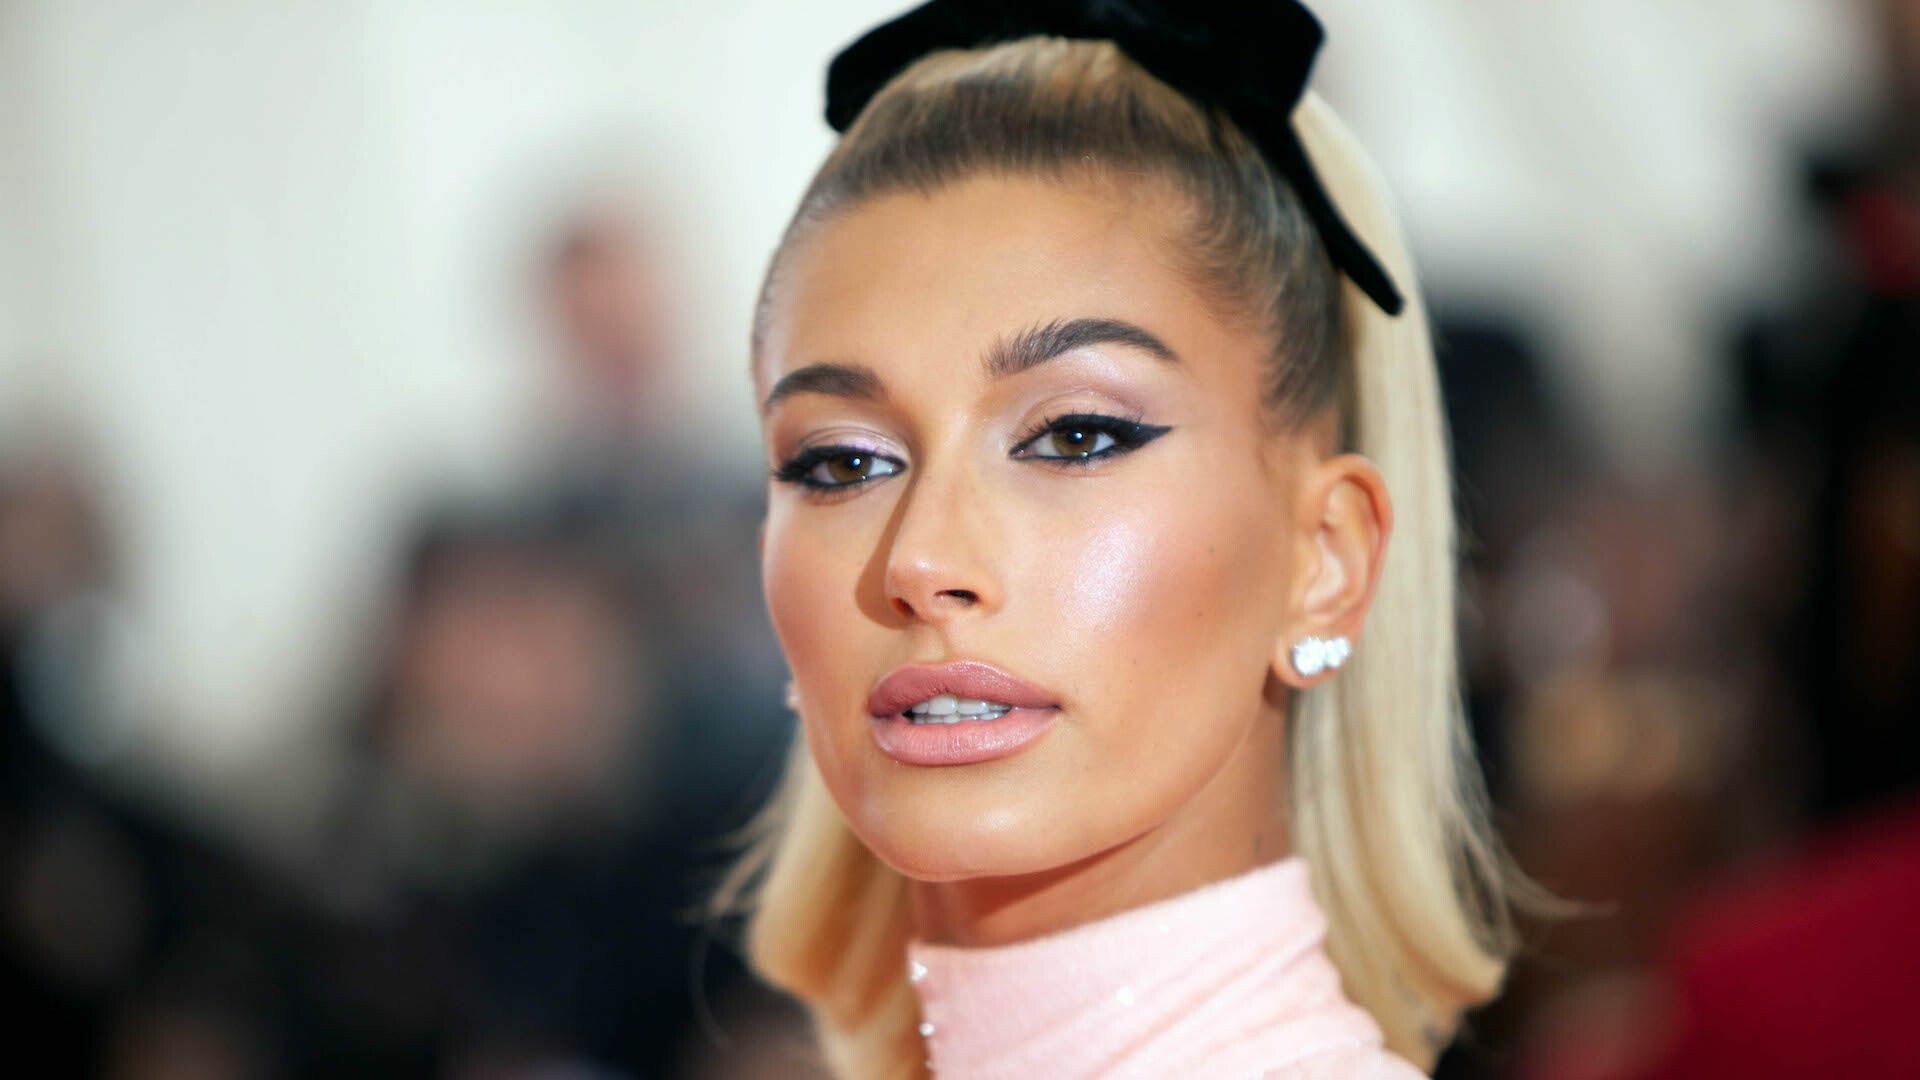 Hailey Bieber, Taylor Swift's Cats movie, Feud speculation, Makeup looks, 1920x1080 Full HD Desktop